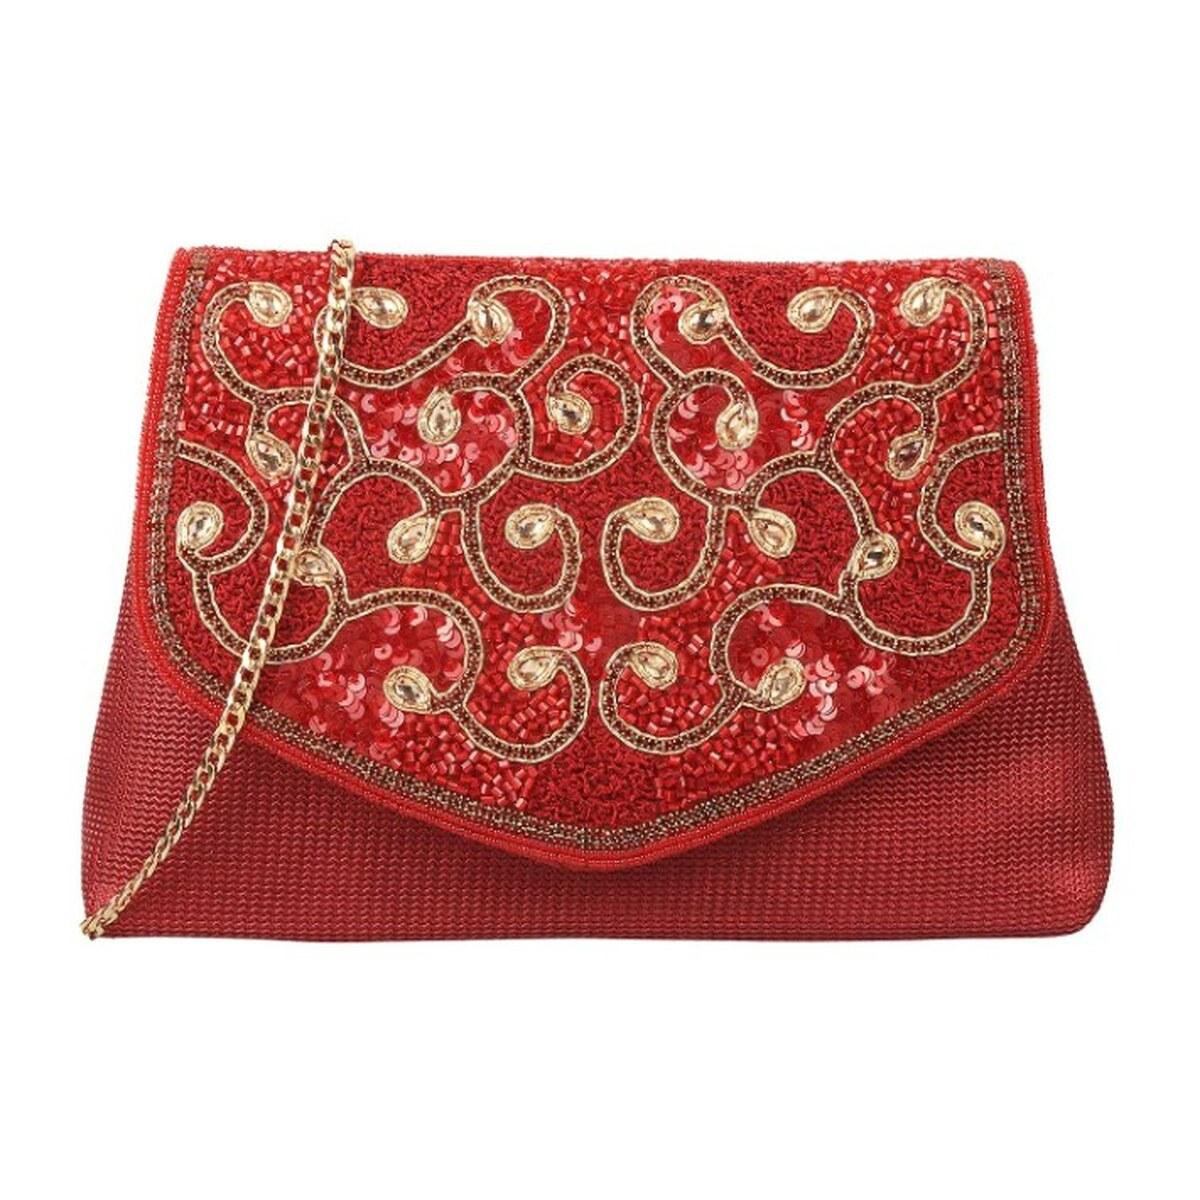 Buy PURSEO Party, Women's/Girls Casual Red Clutch Bag Purse Handbag Wedding  Bridal Gathering Functions (Gold,Maroon) Online at Best Prices in India -  JioMart.